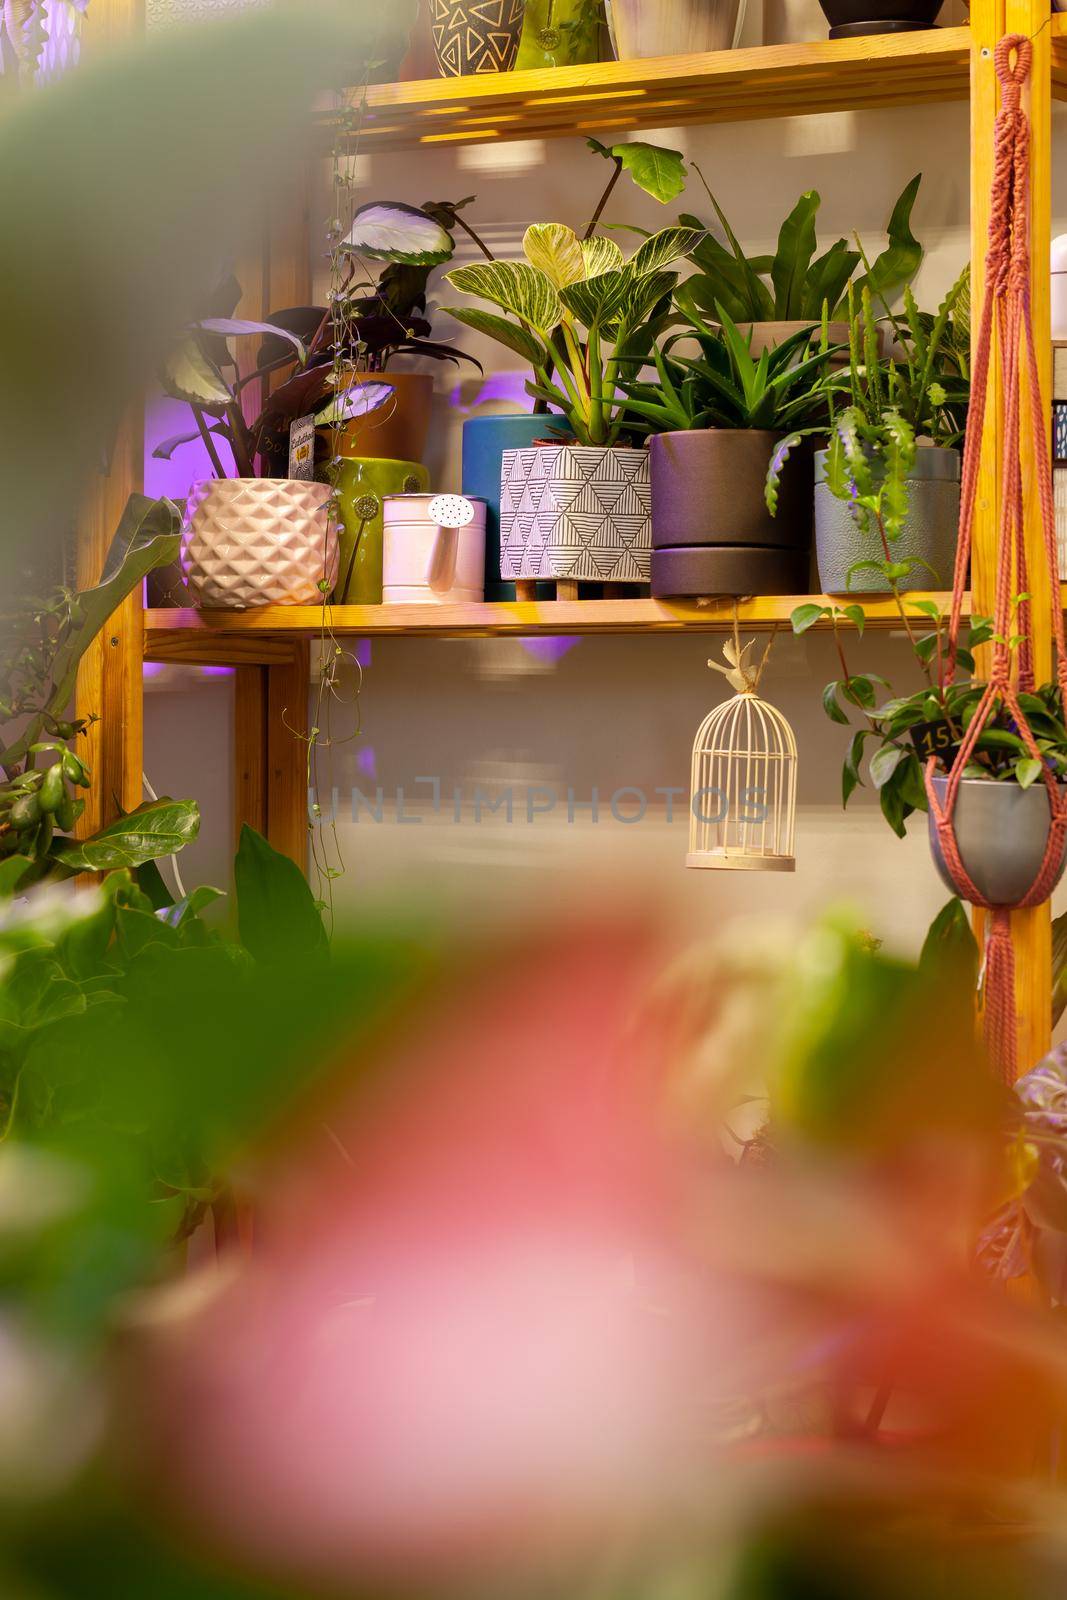 An Image of a Flower Shop with exotic potted plants. by igor_stramyk